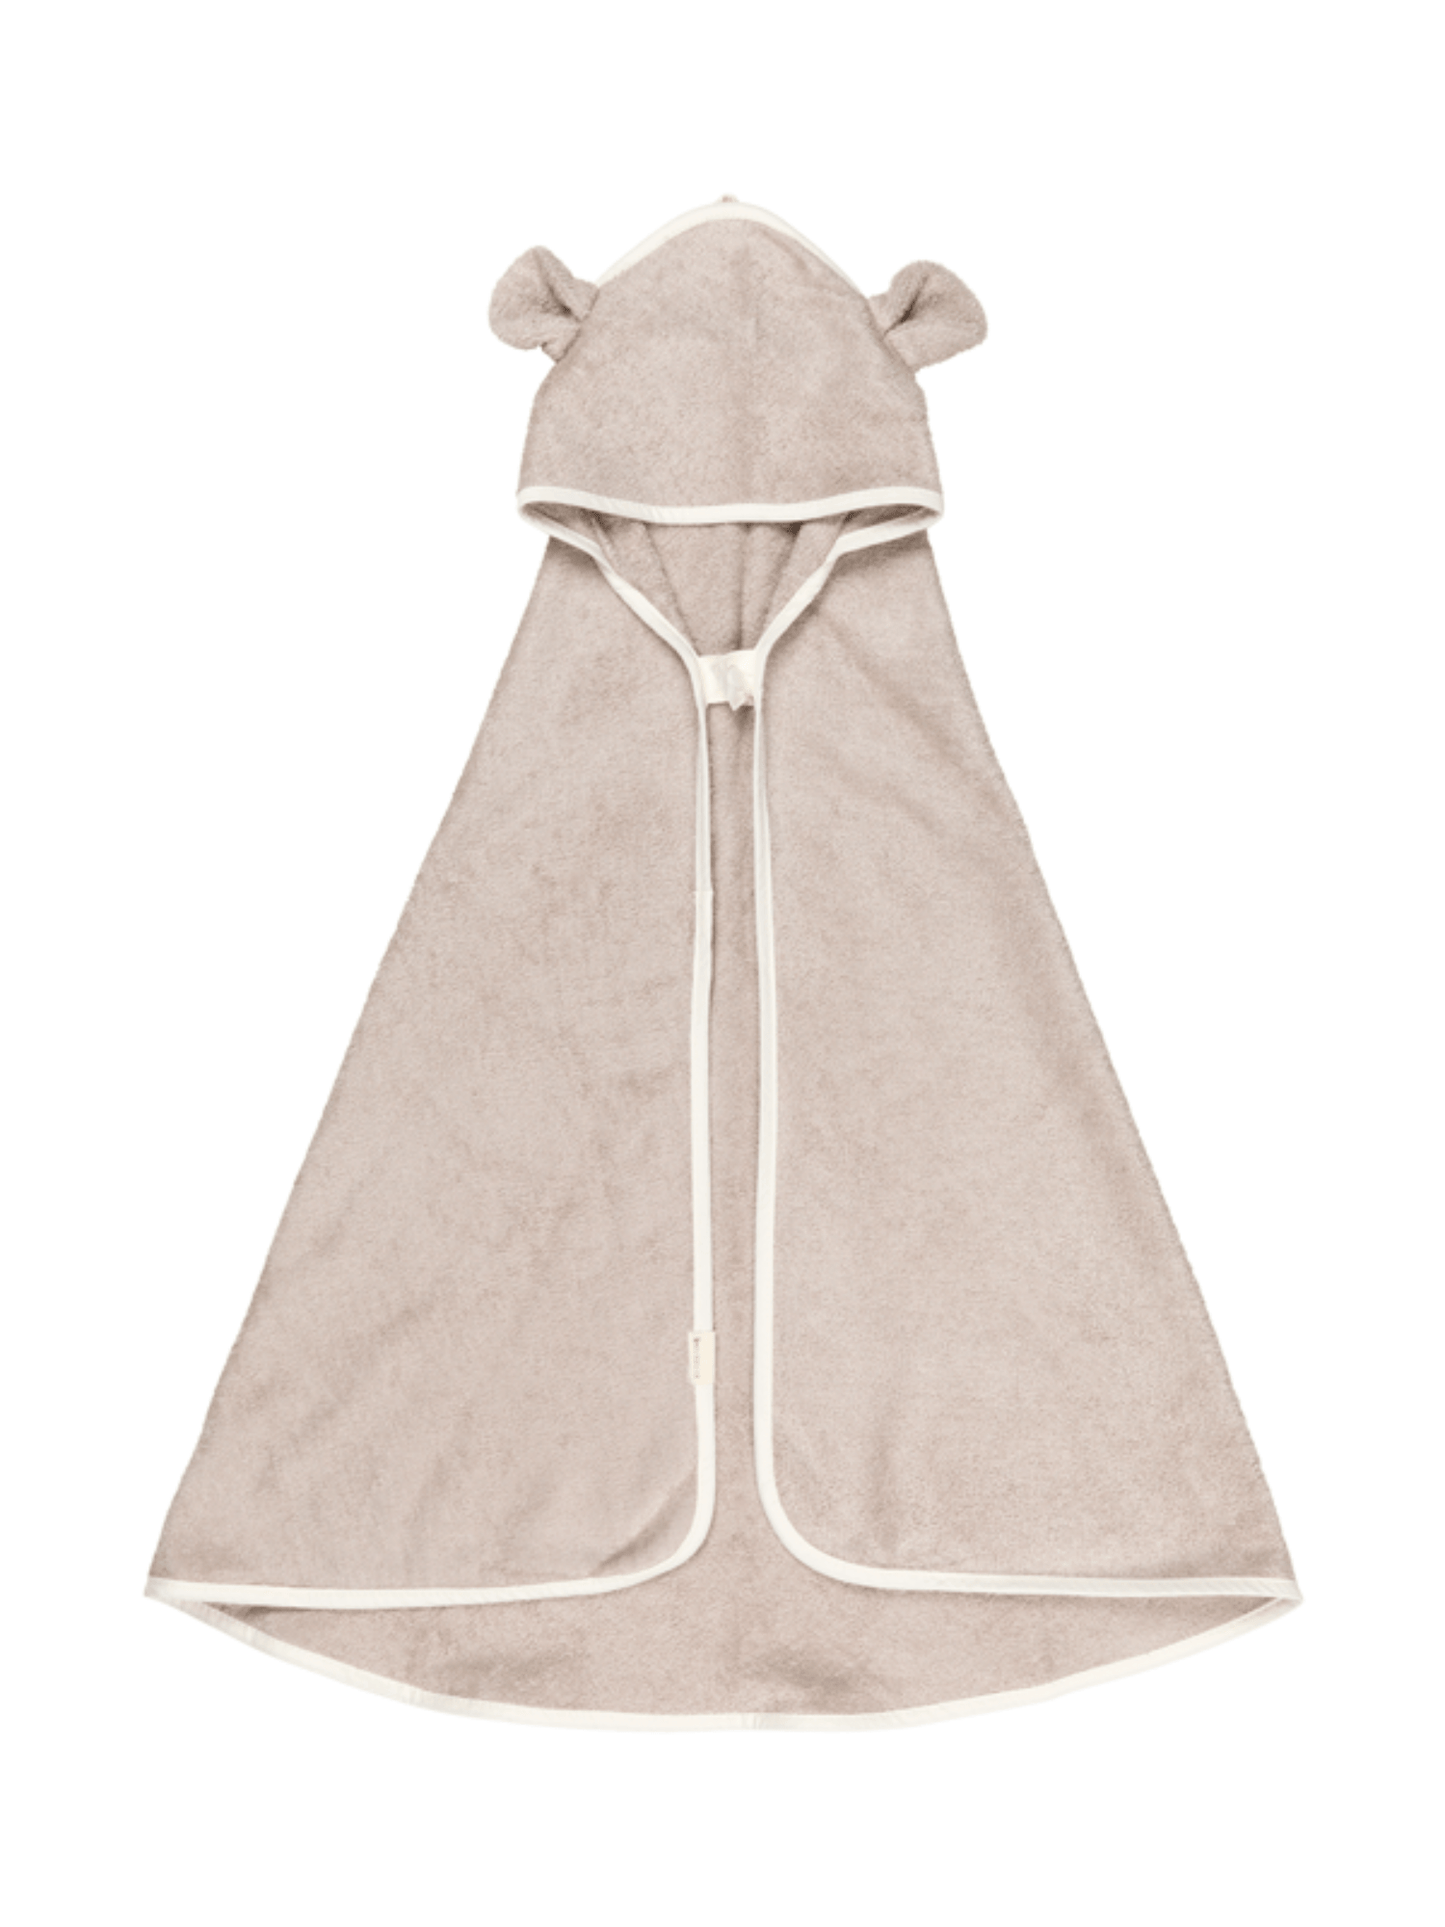 Bear Bamboo Hooded Towel For Kids By Fabelab Beige